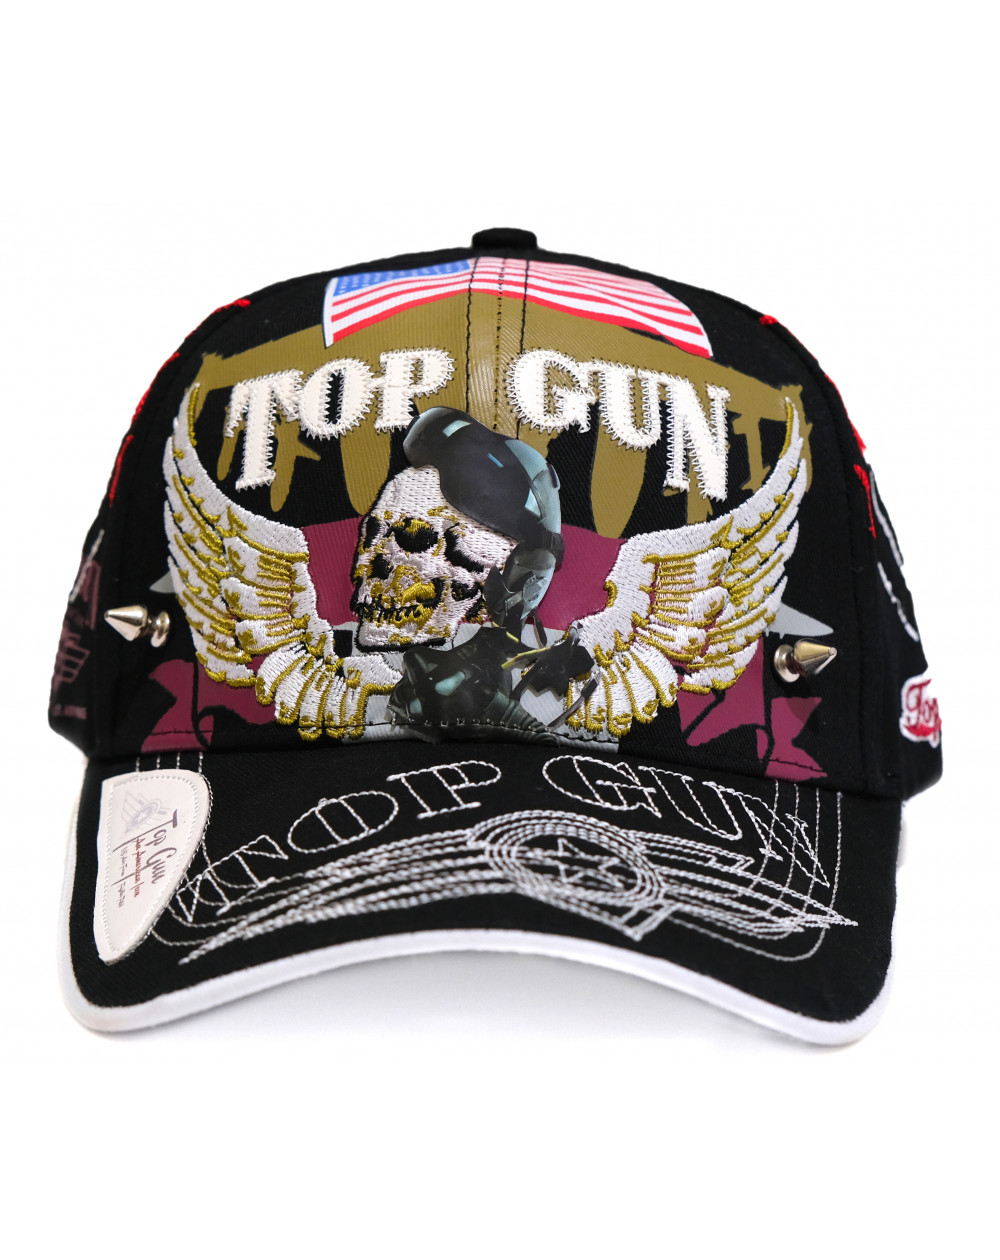 TOP GUN® EXCLUSIVE - Black / Limited & Numbered Edition